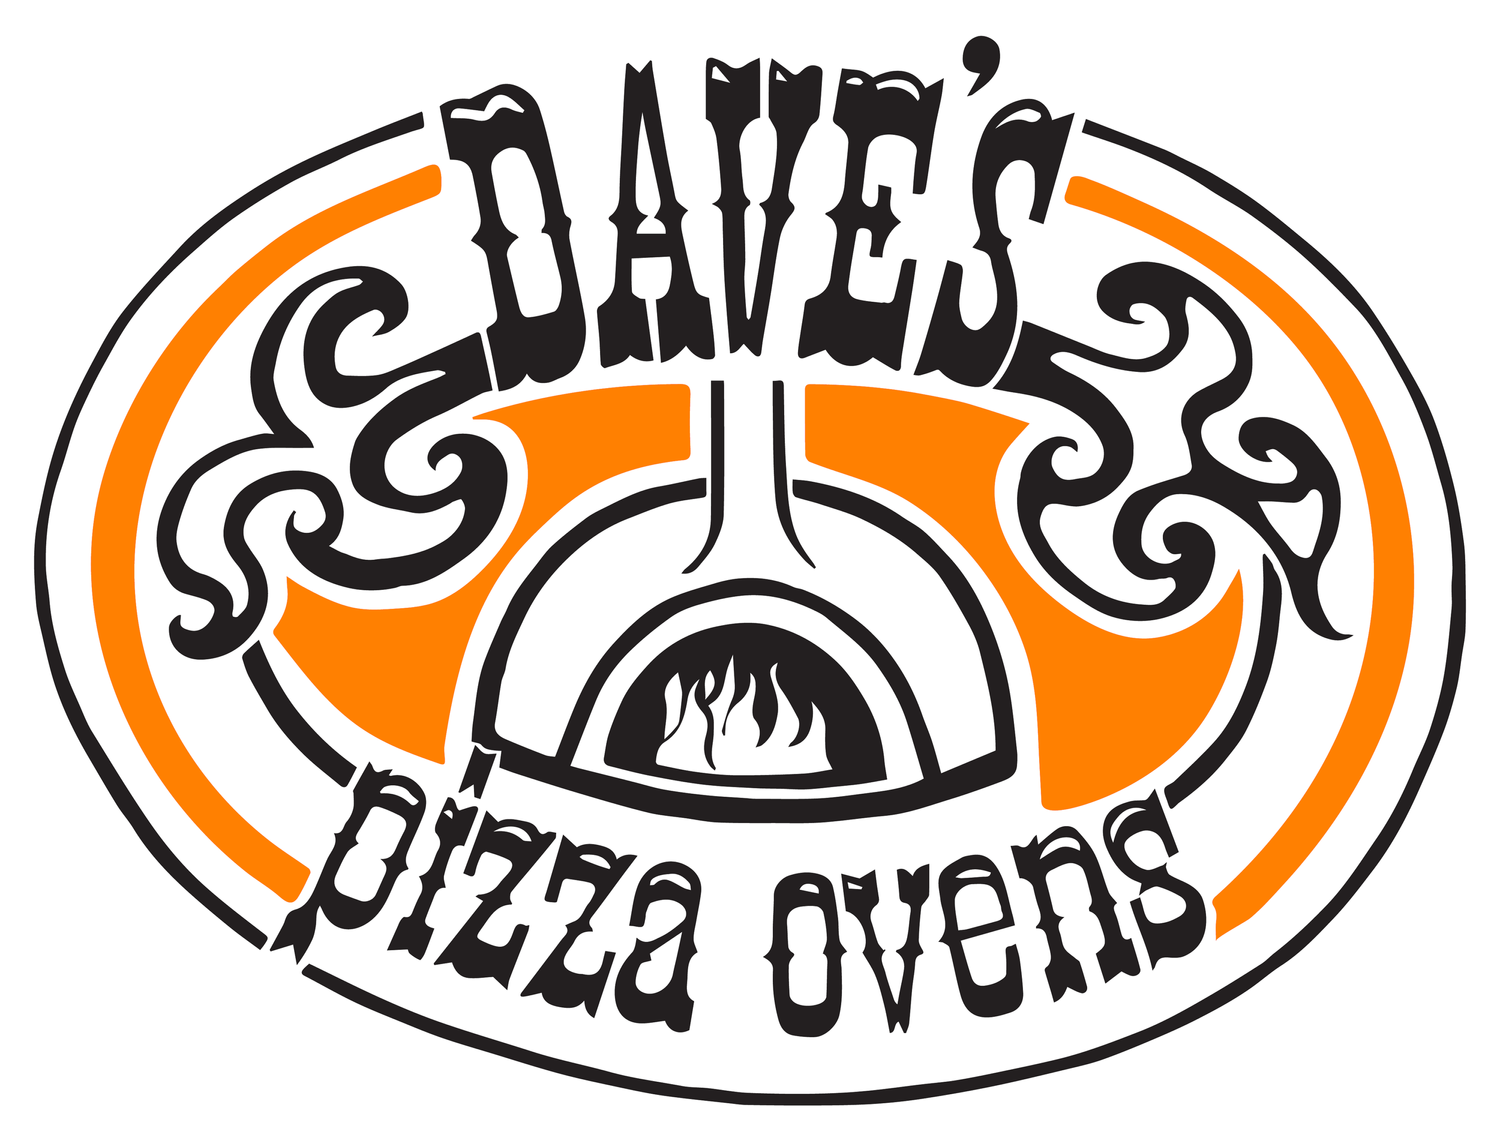 Dave&#39;s Pizza Ovens